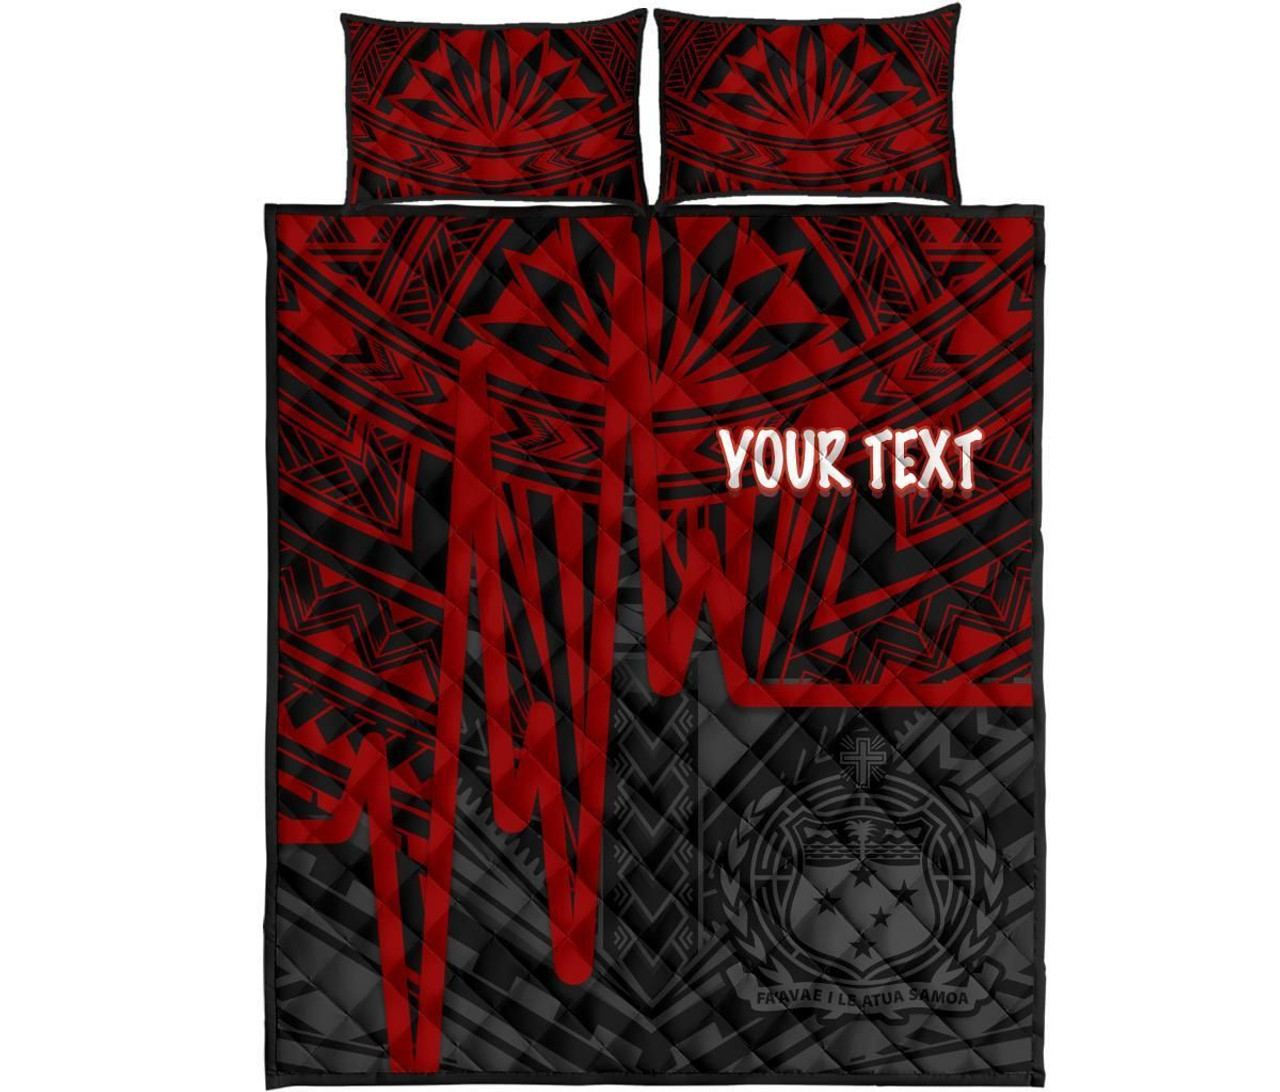 Samoa Personalised Quilt Bed Set - Samoa Seal With Polynesian Pattern In Heartbeat Style (Red) 5